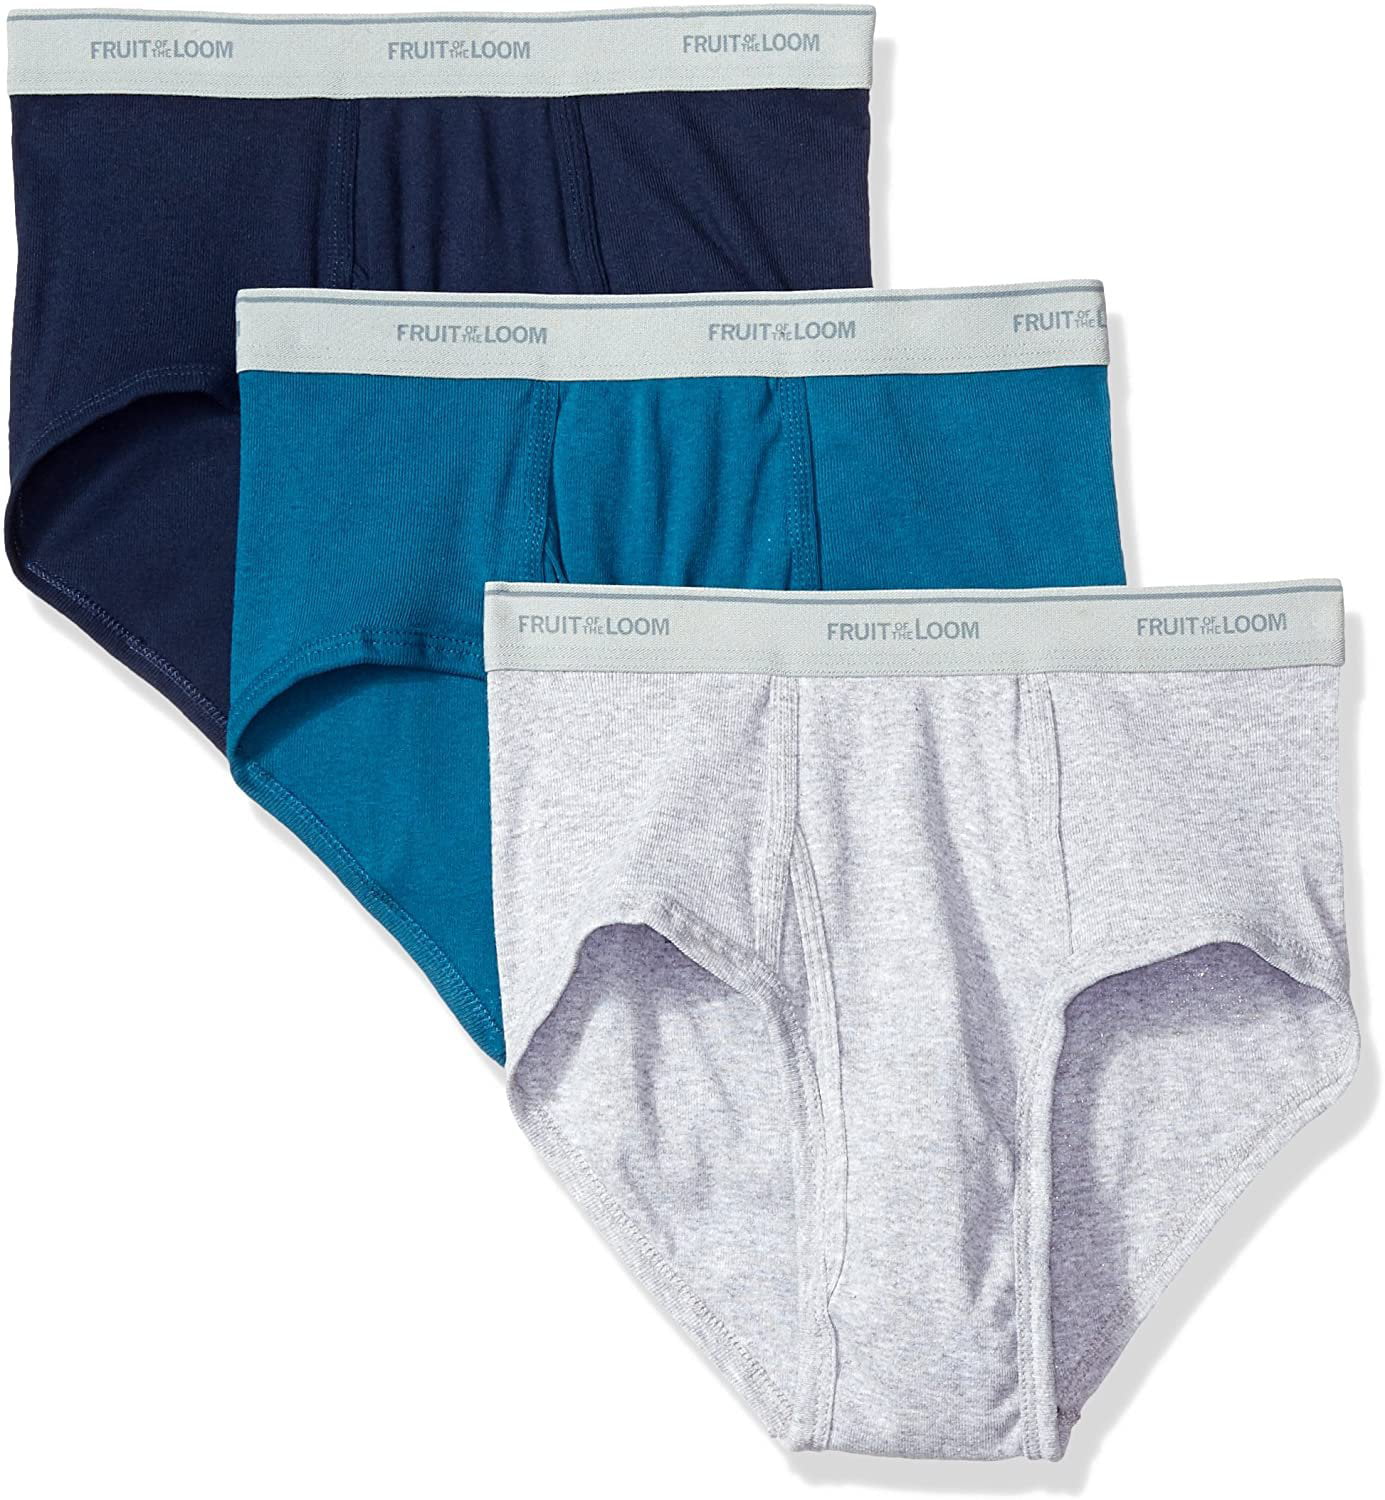 Fruit of the Loom - Fruit of the Loom Men'sFashion Brief, Assorted, X ...